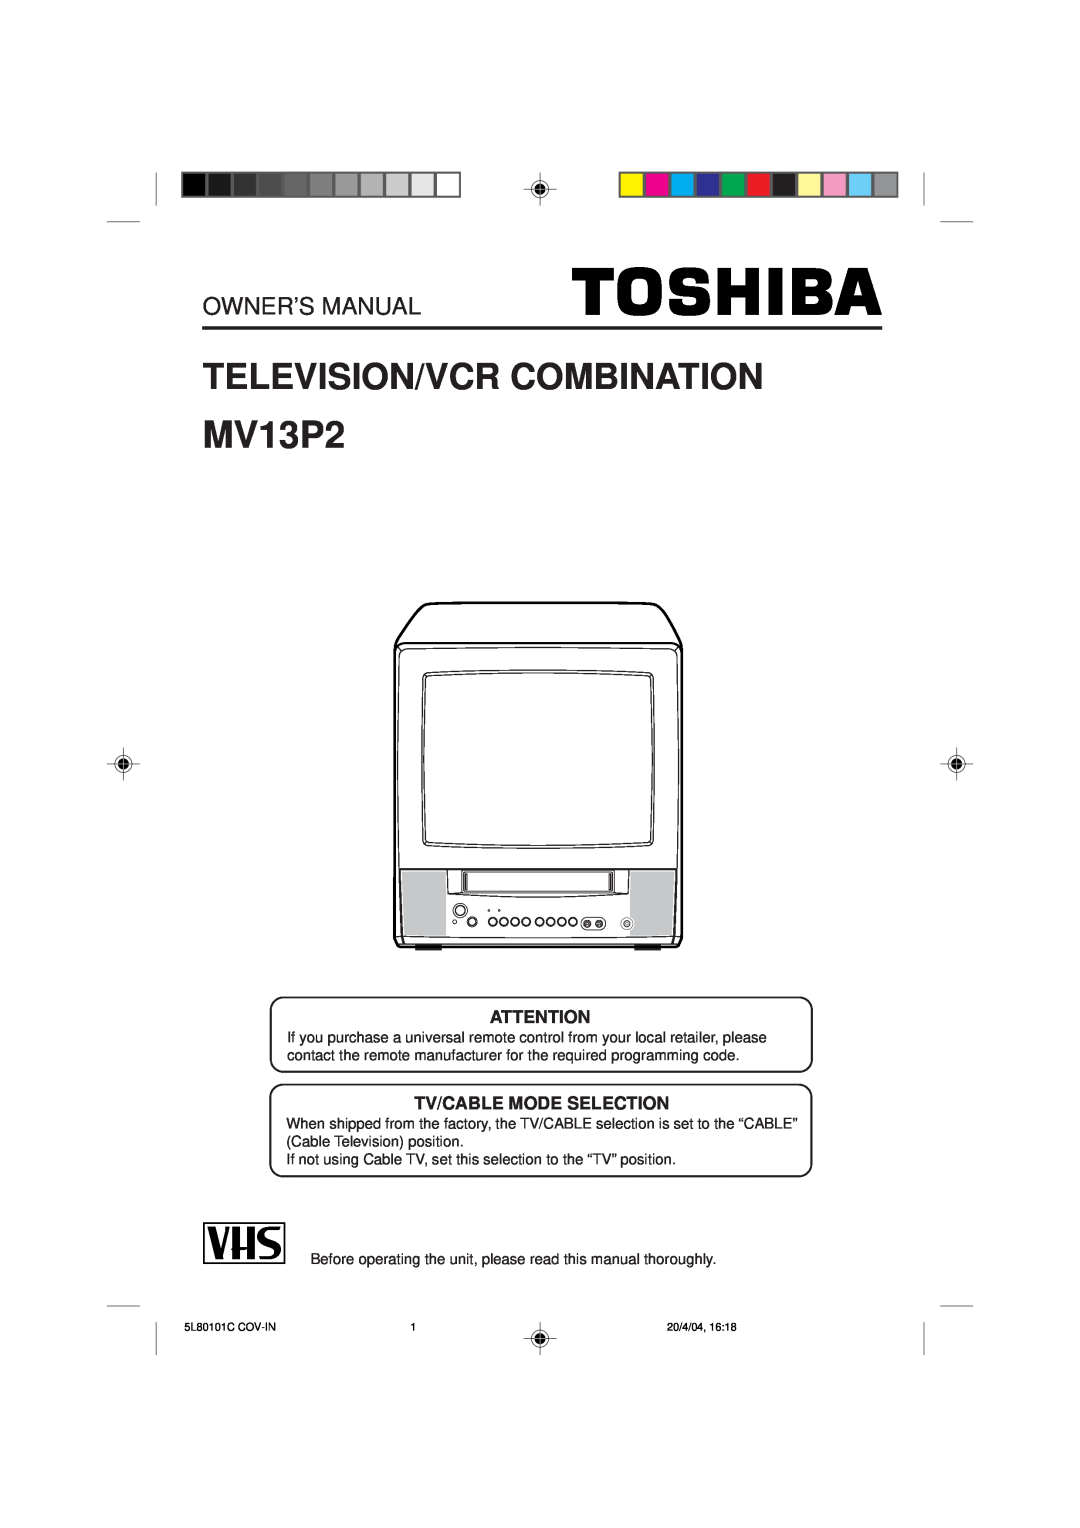 Toshiba MV13P2 owner manual Television/Vcr Combination, Owner’S Manual 